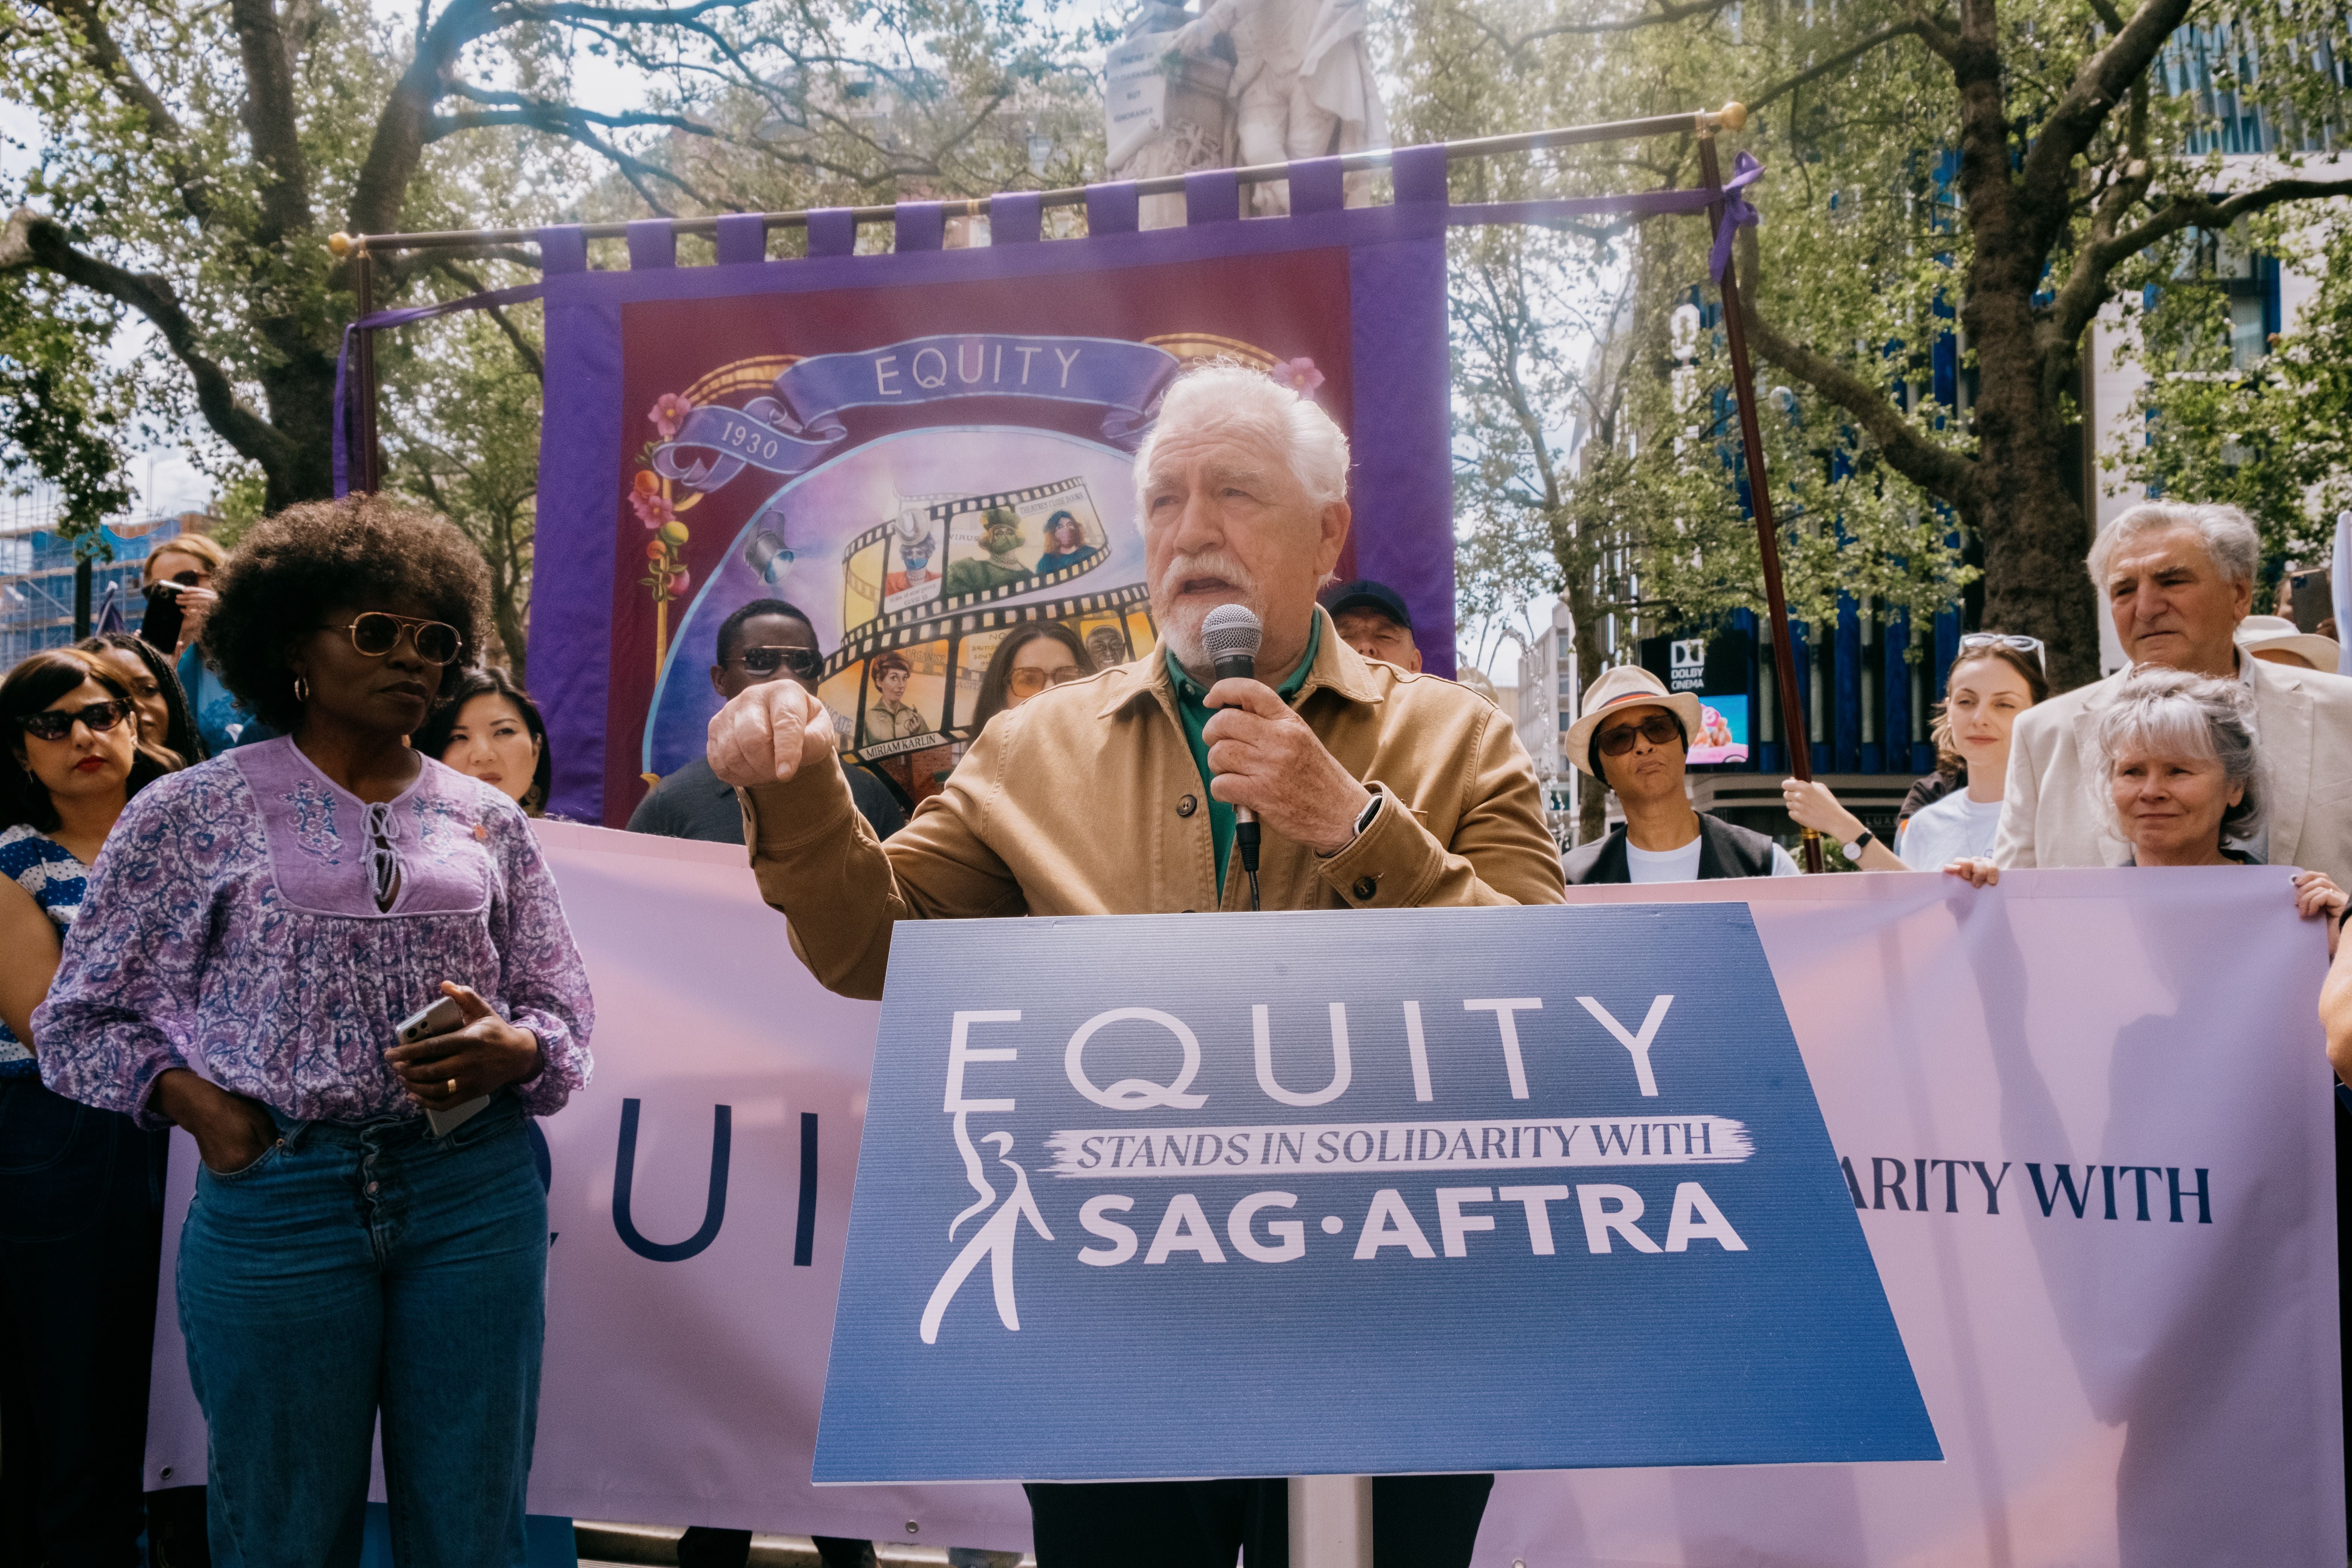 Brian Cox speaks at Equity rally in support of SAG-AFTRA and WGA strike